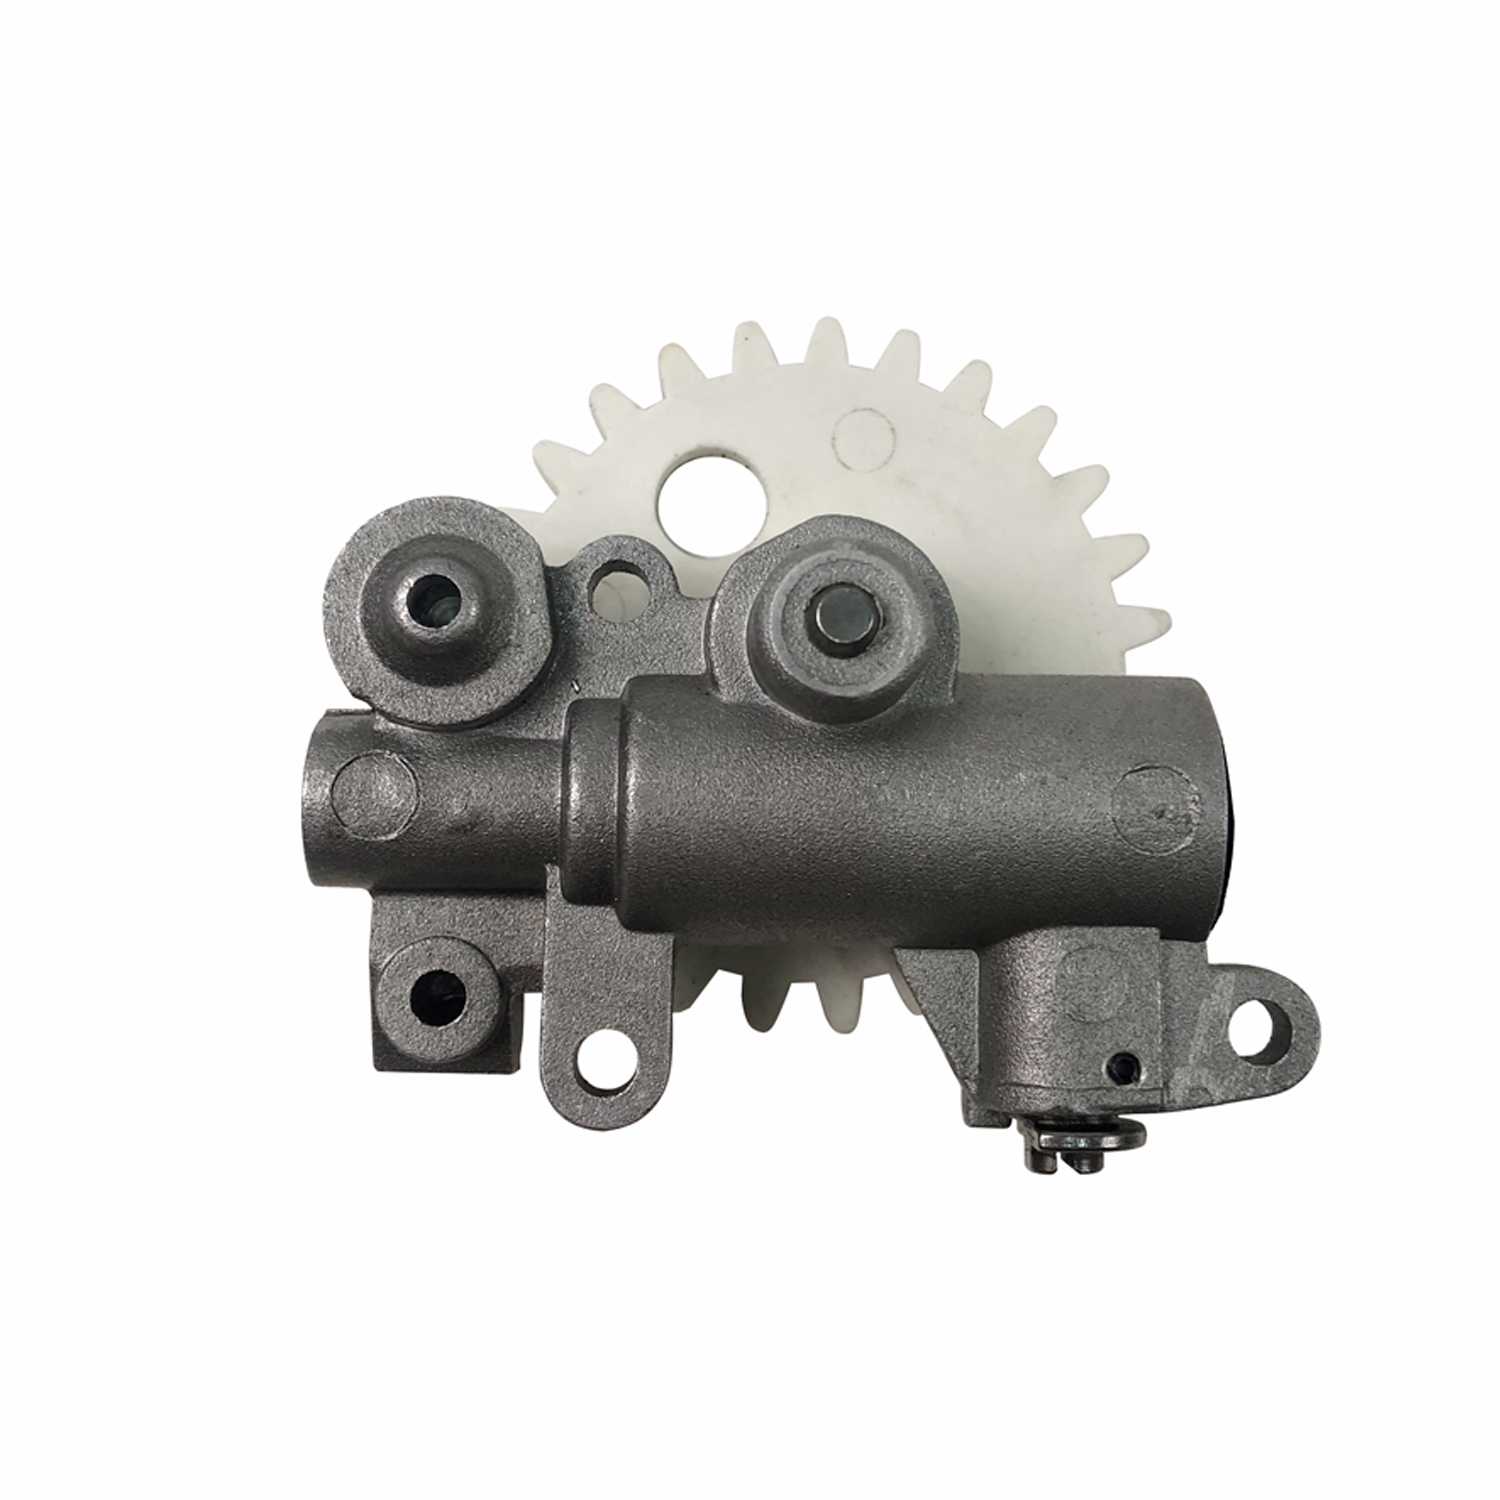 Oil Pump WT Spur Gear For Stihl MS880 088 Chainsaw OEM 1124 640 3201